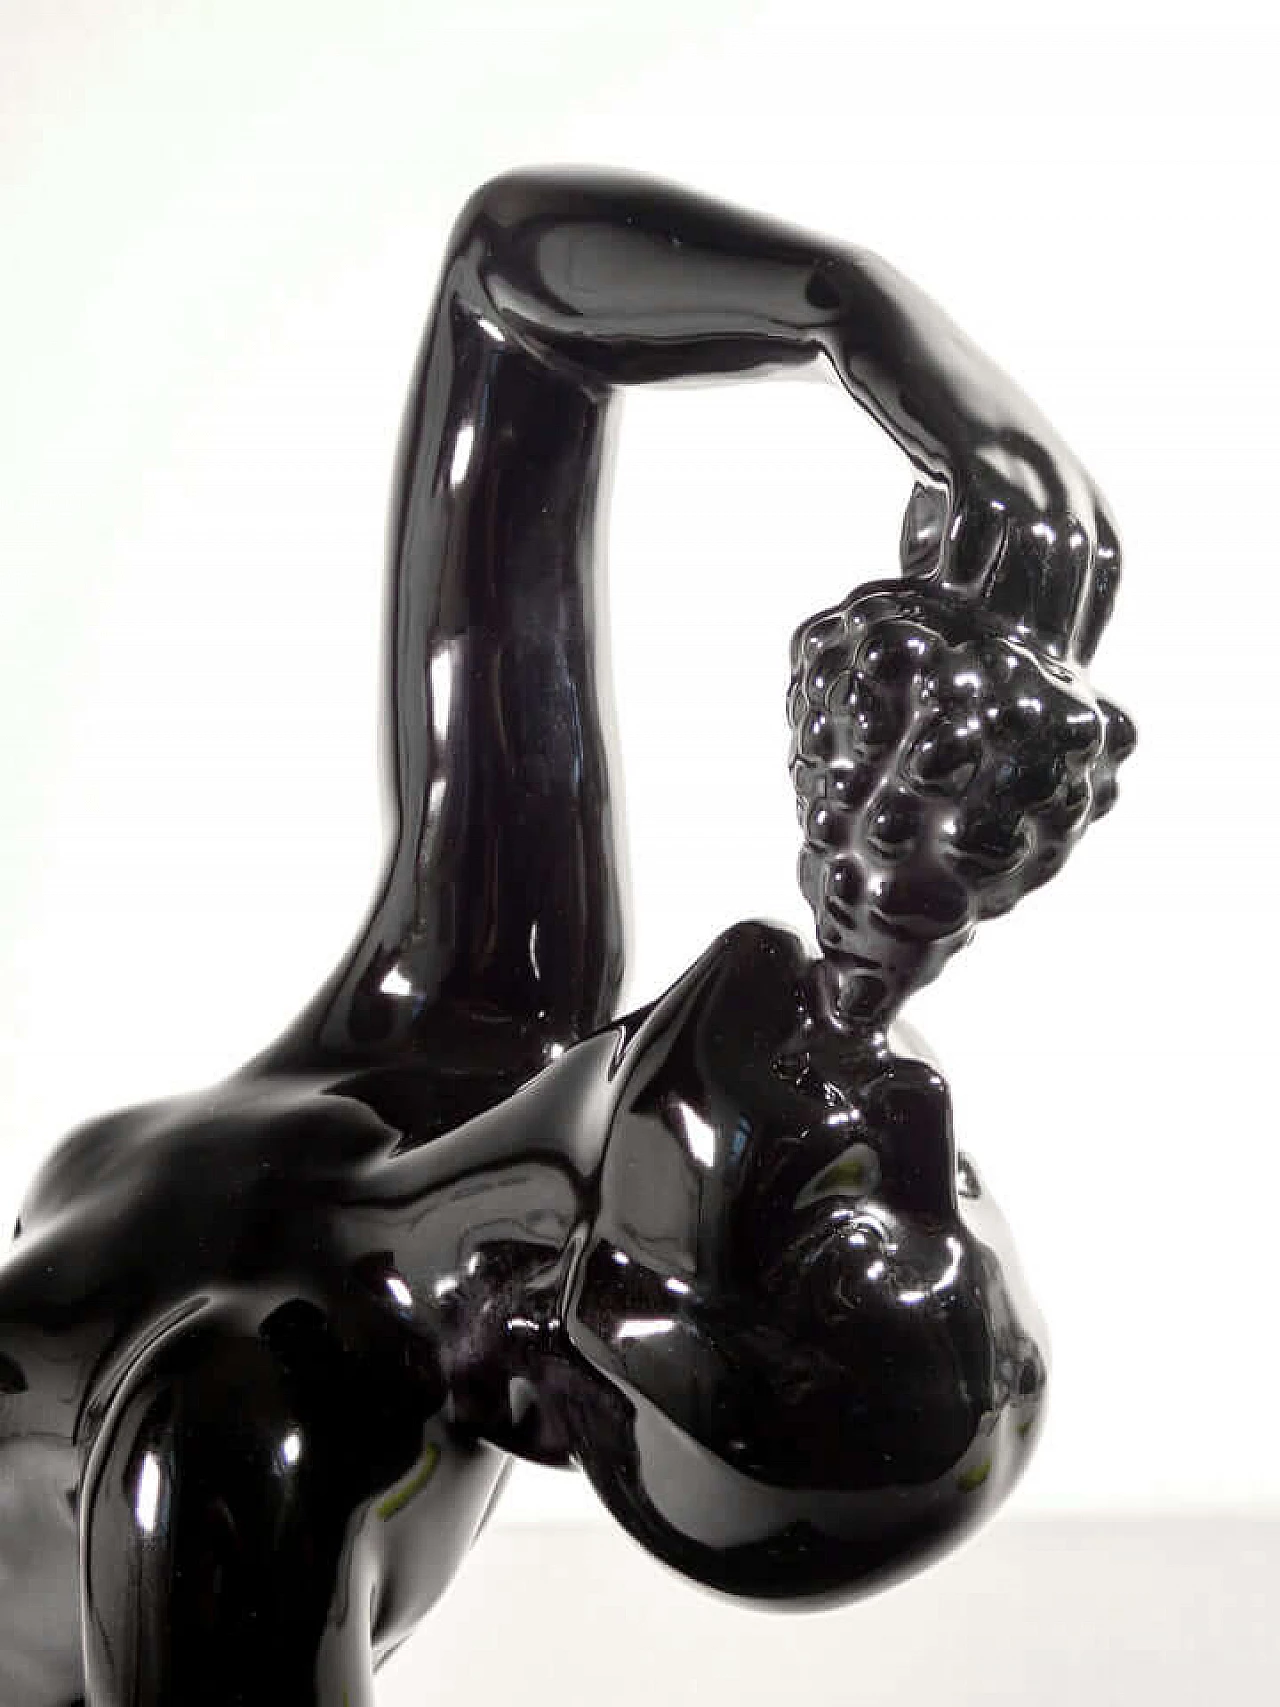 Henry Fugère, female nude with grapes, glazed ceramic sculpture, 1920s 3